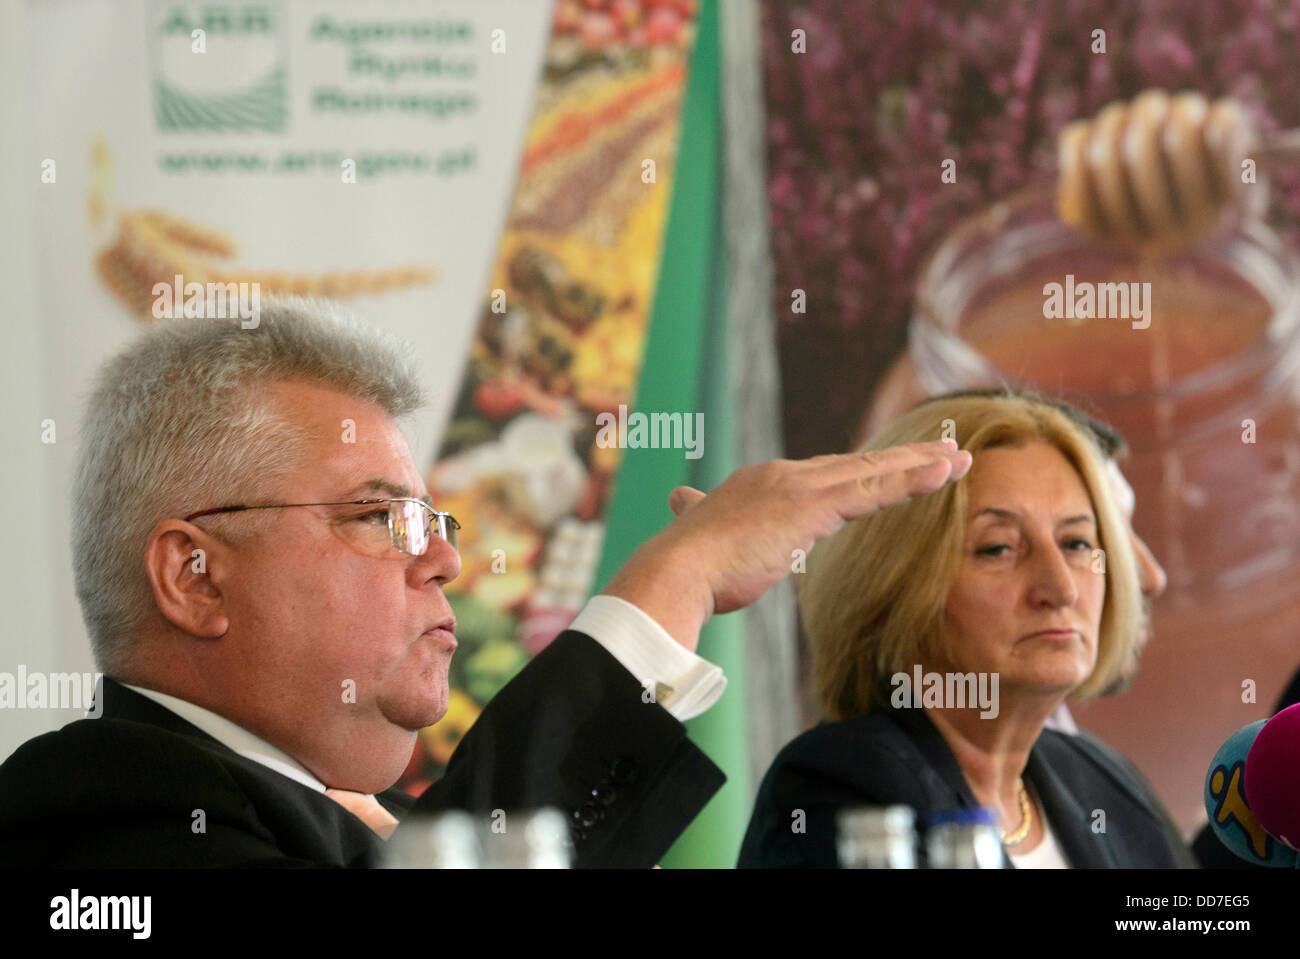 Deputy Minister of the ministry of agriculture and countryside development Zofia Szalczykova (right) and director of the Veterinarian inspection of the Polish Republic Janusz Zwiazek speak during the press conference about the quality of the Polish food products in Prague, Czech Republic on August 28, 2013. (CTK Photo/Michal Kamaryt) Stock Photo